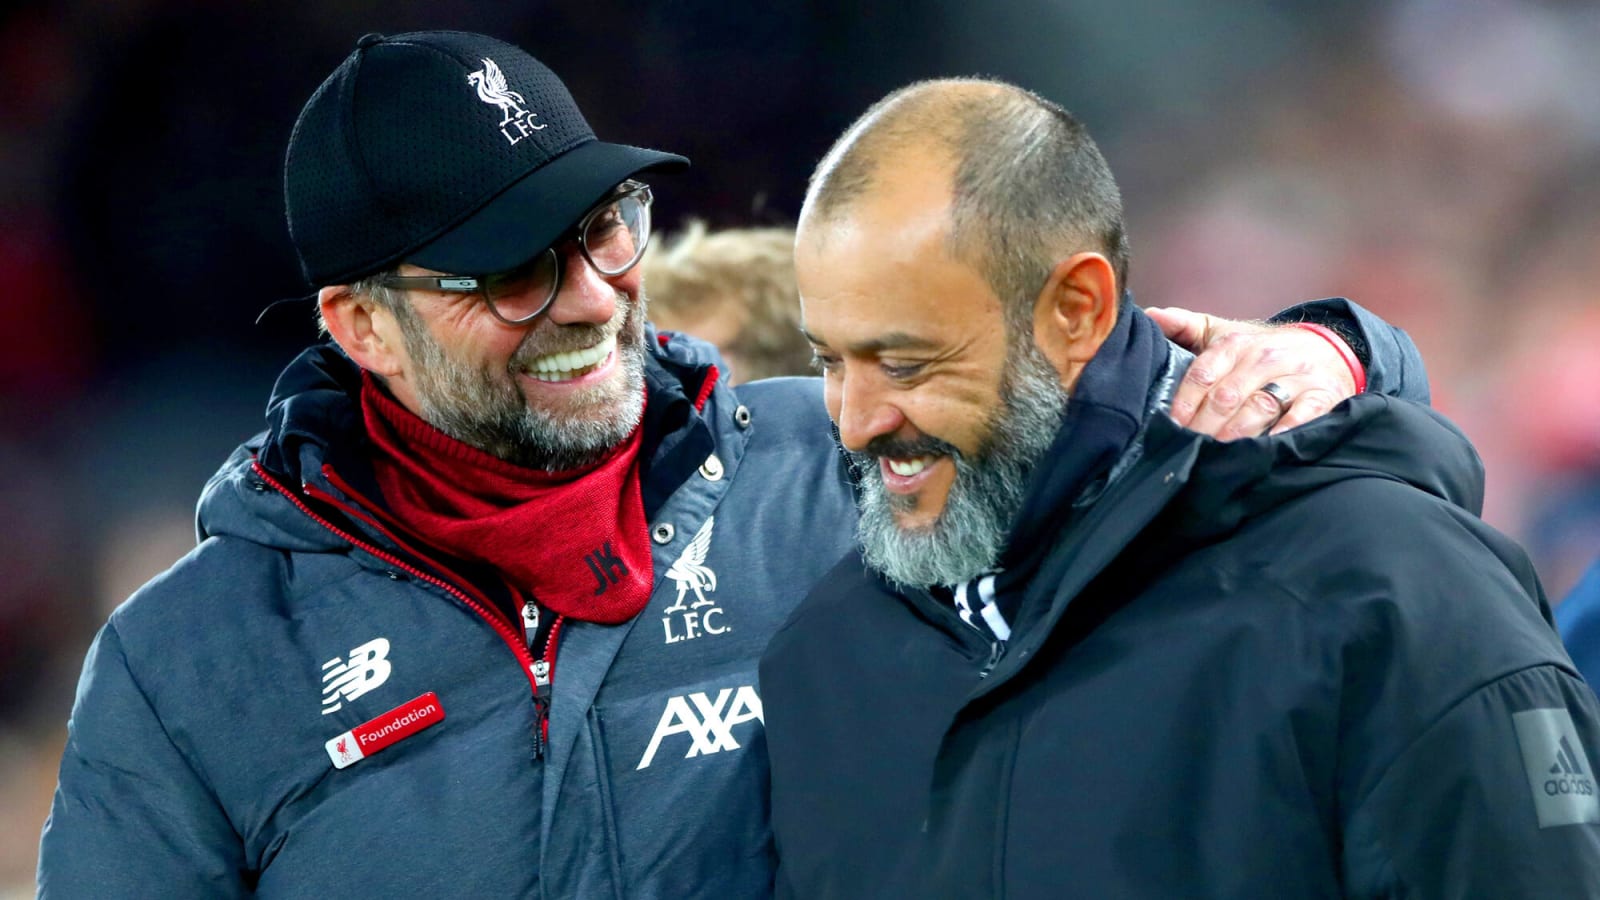 ‘Recognition for a job well done’ – Liverpool-linked manager flattered by Reds’ reported interest